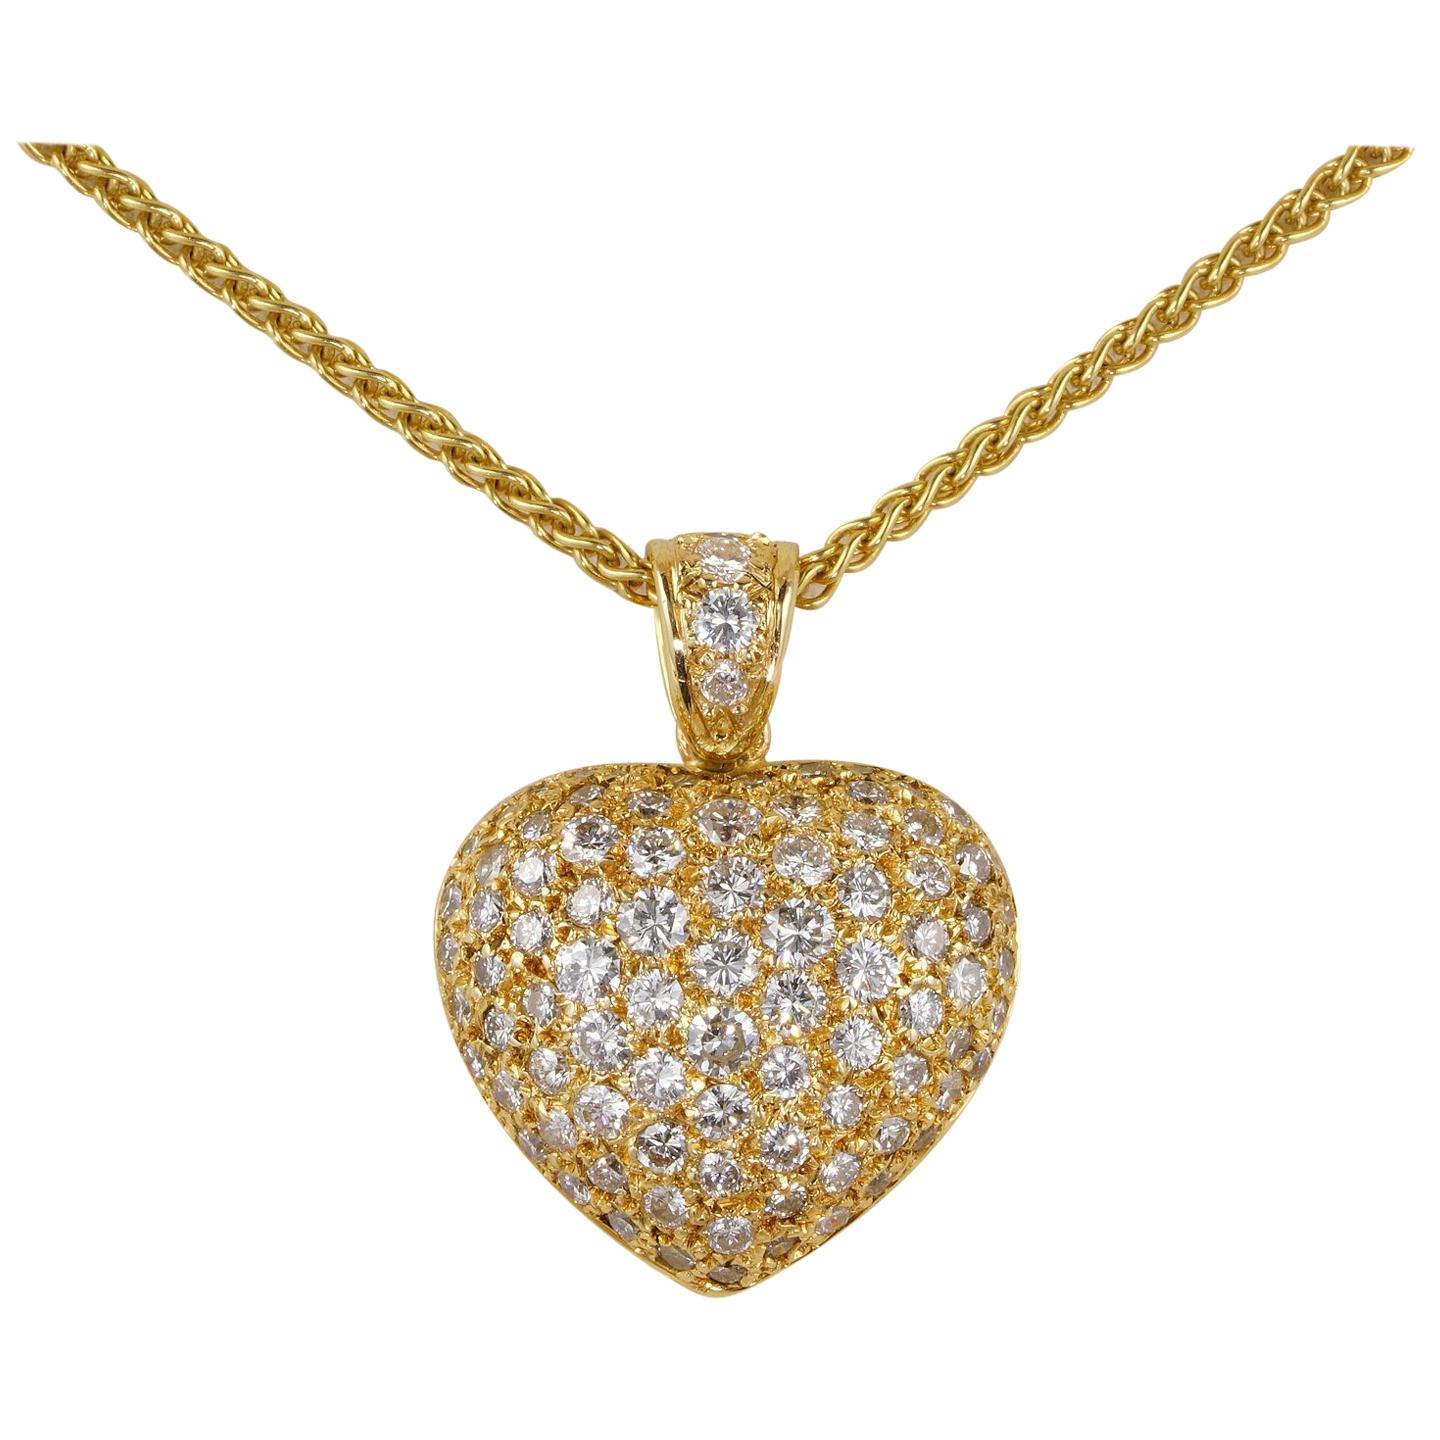 Spectacular Quality French 2.80 Carat Diamond Heat Pendant Chain For Sale